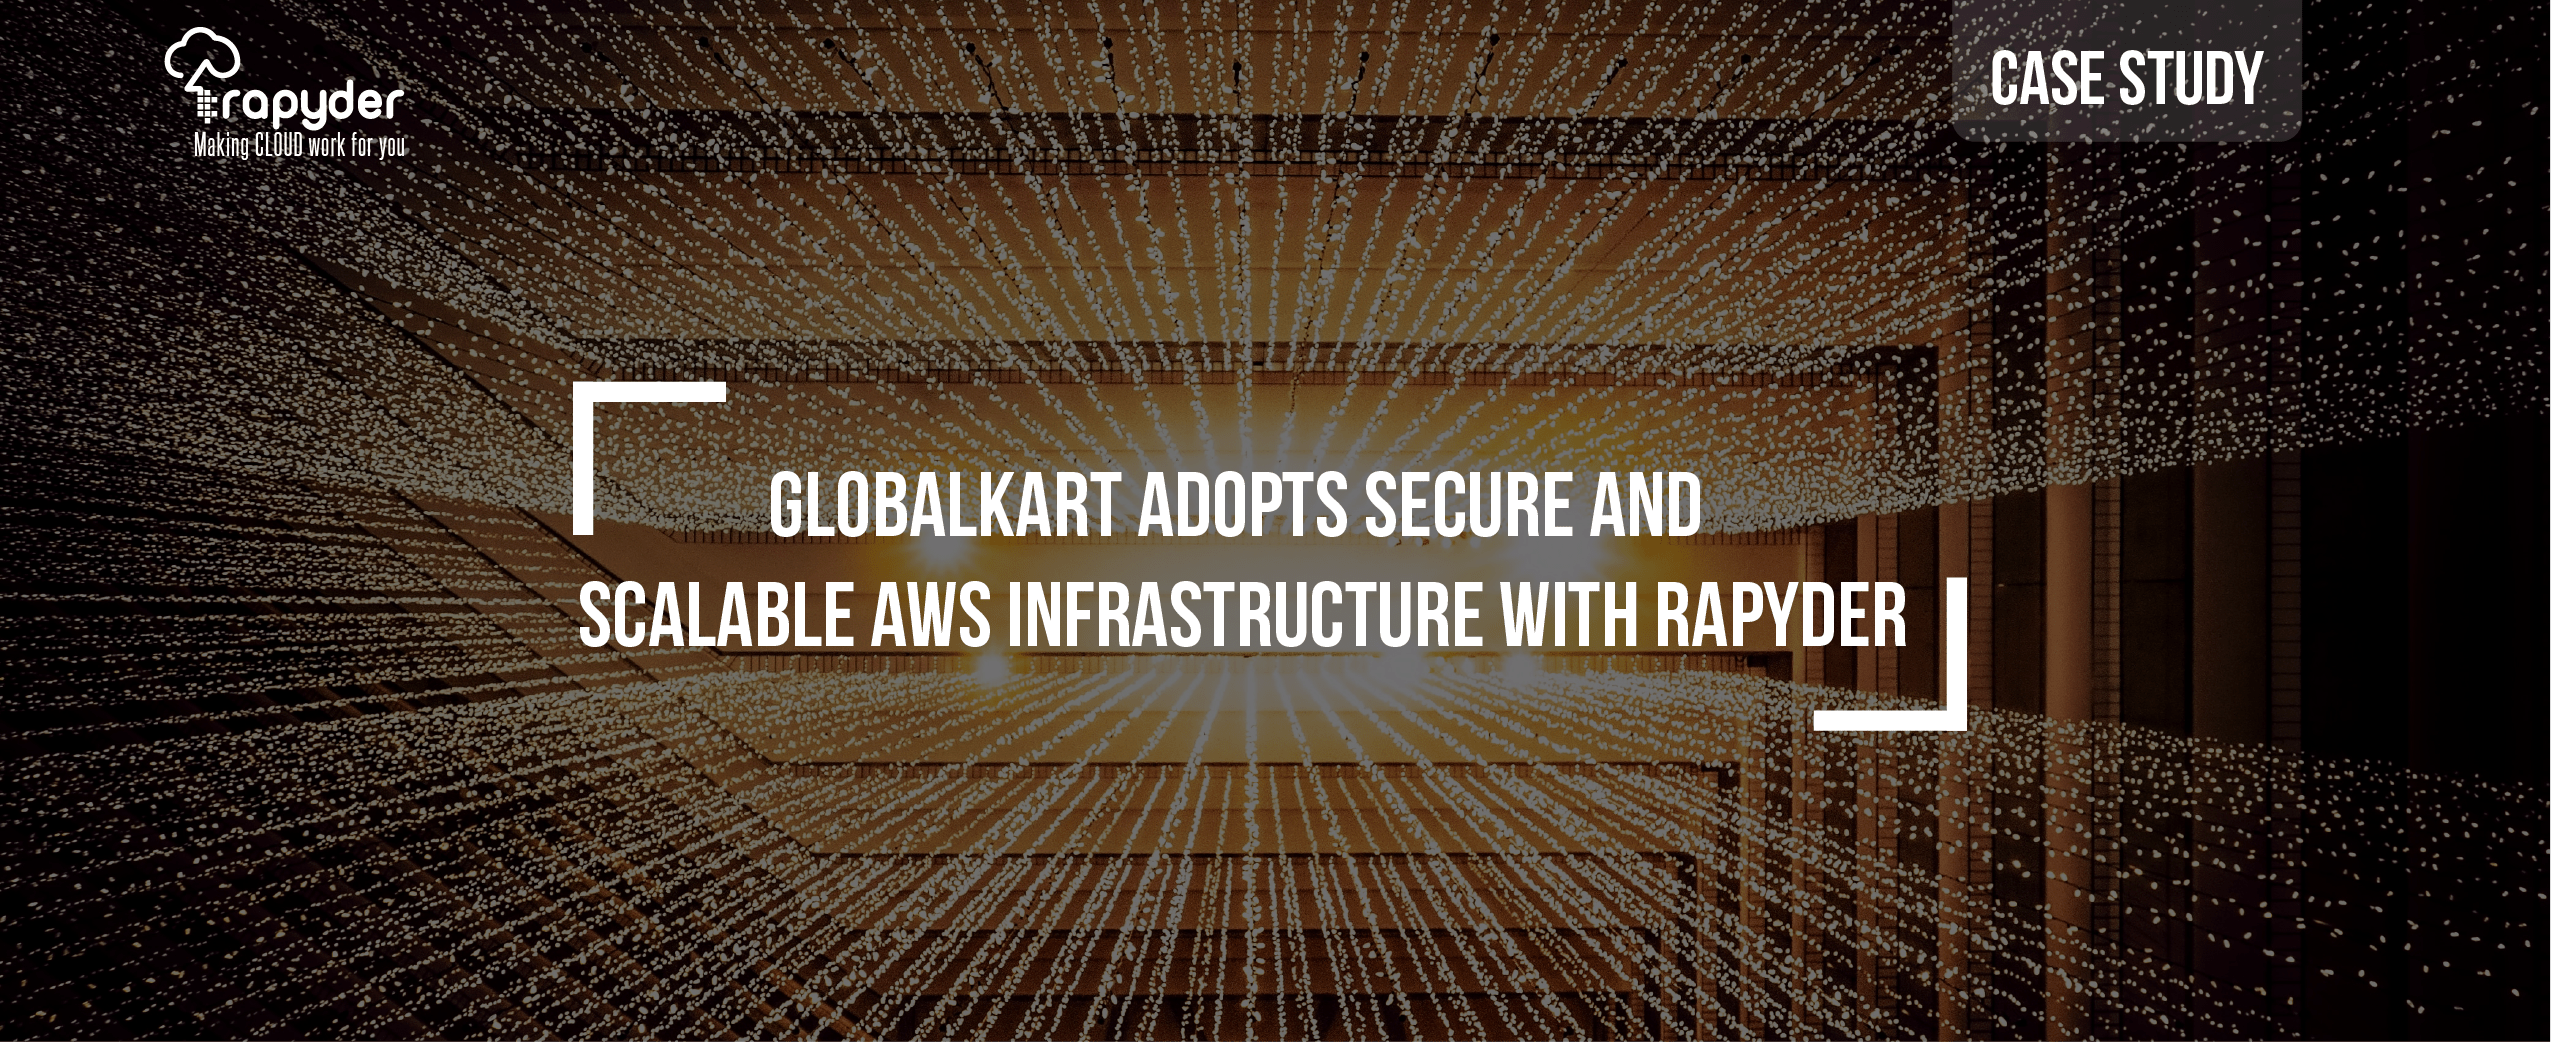 AWS E-Commerce Case Study: GlobalKart Enhances its Security and Scalability with AWS Infrastructure